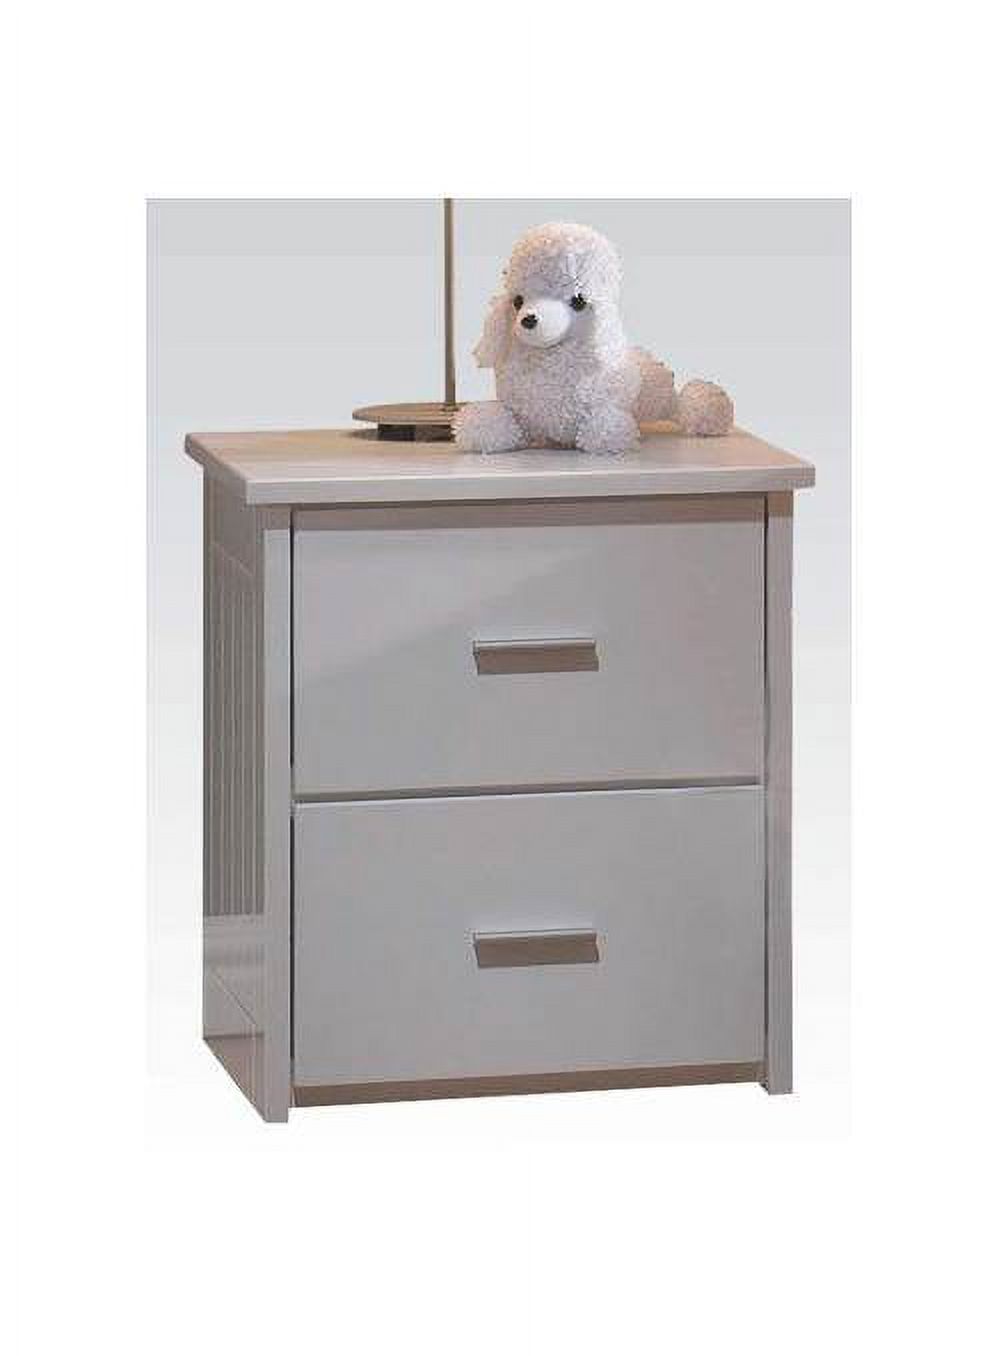 ACME Furniture Bungalow Nightstand, White - image 1 of 1